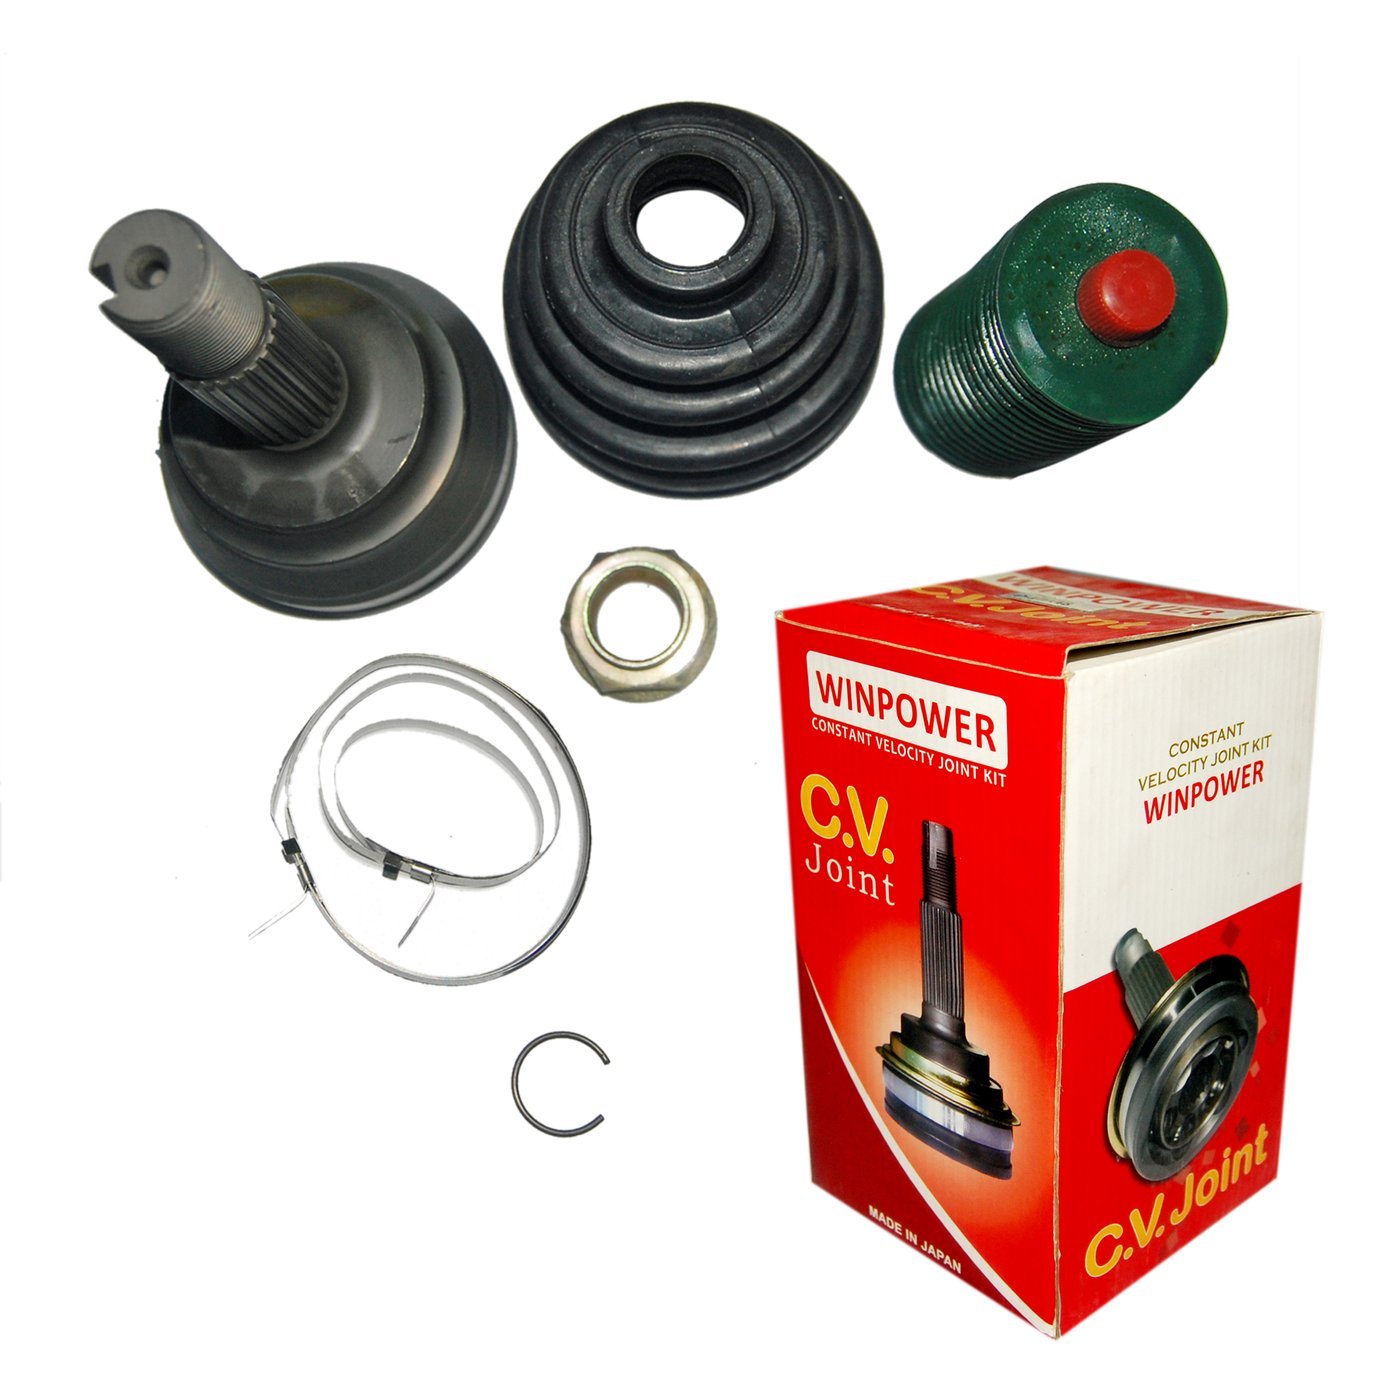 CV Joint, WINPOWER, 39100-51Y00, NI-13, 22(in)x55(D)x25(out) (000737) - Win Store